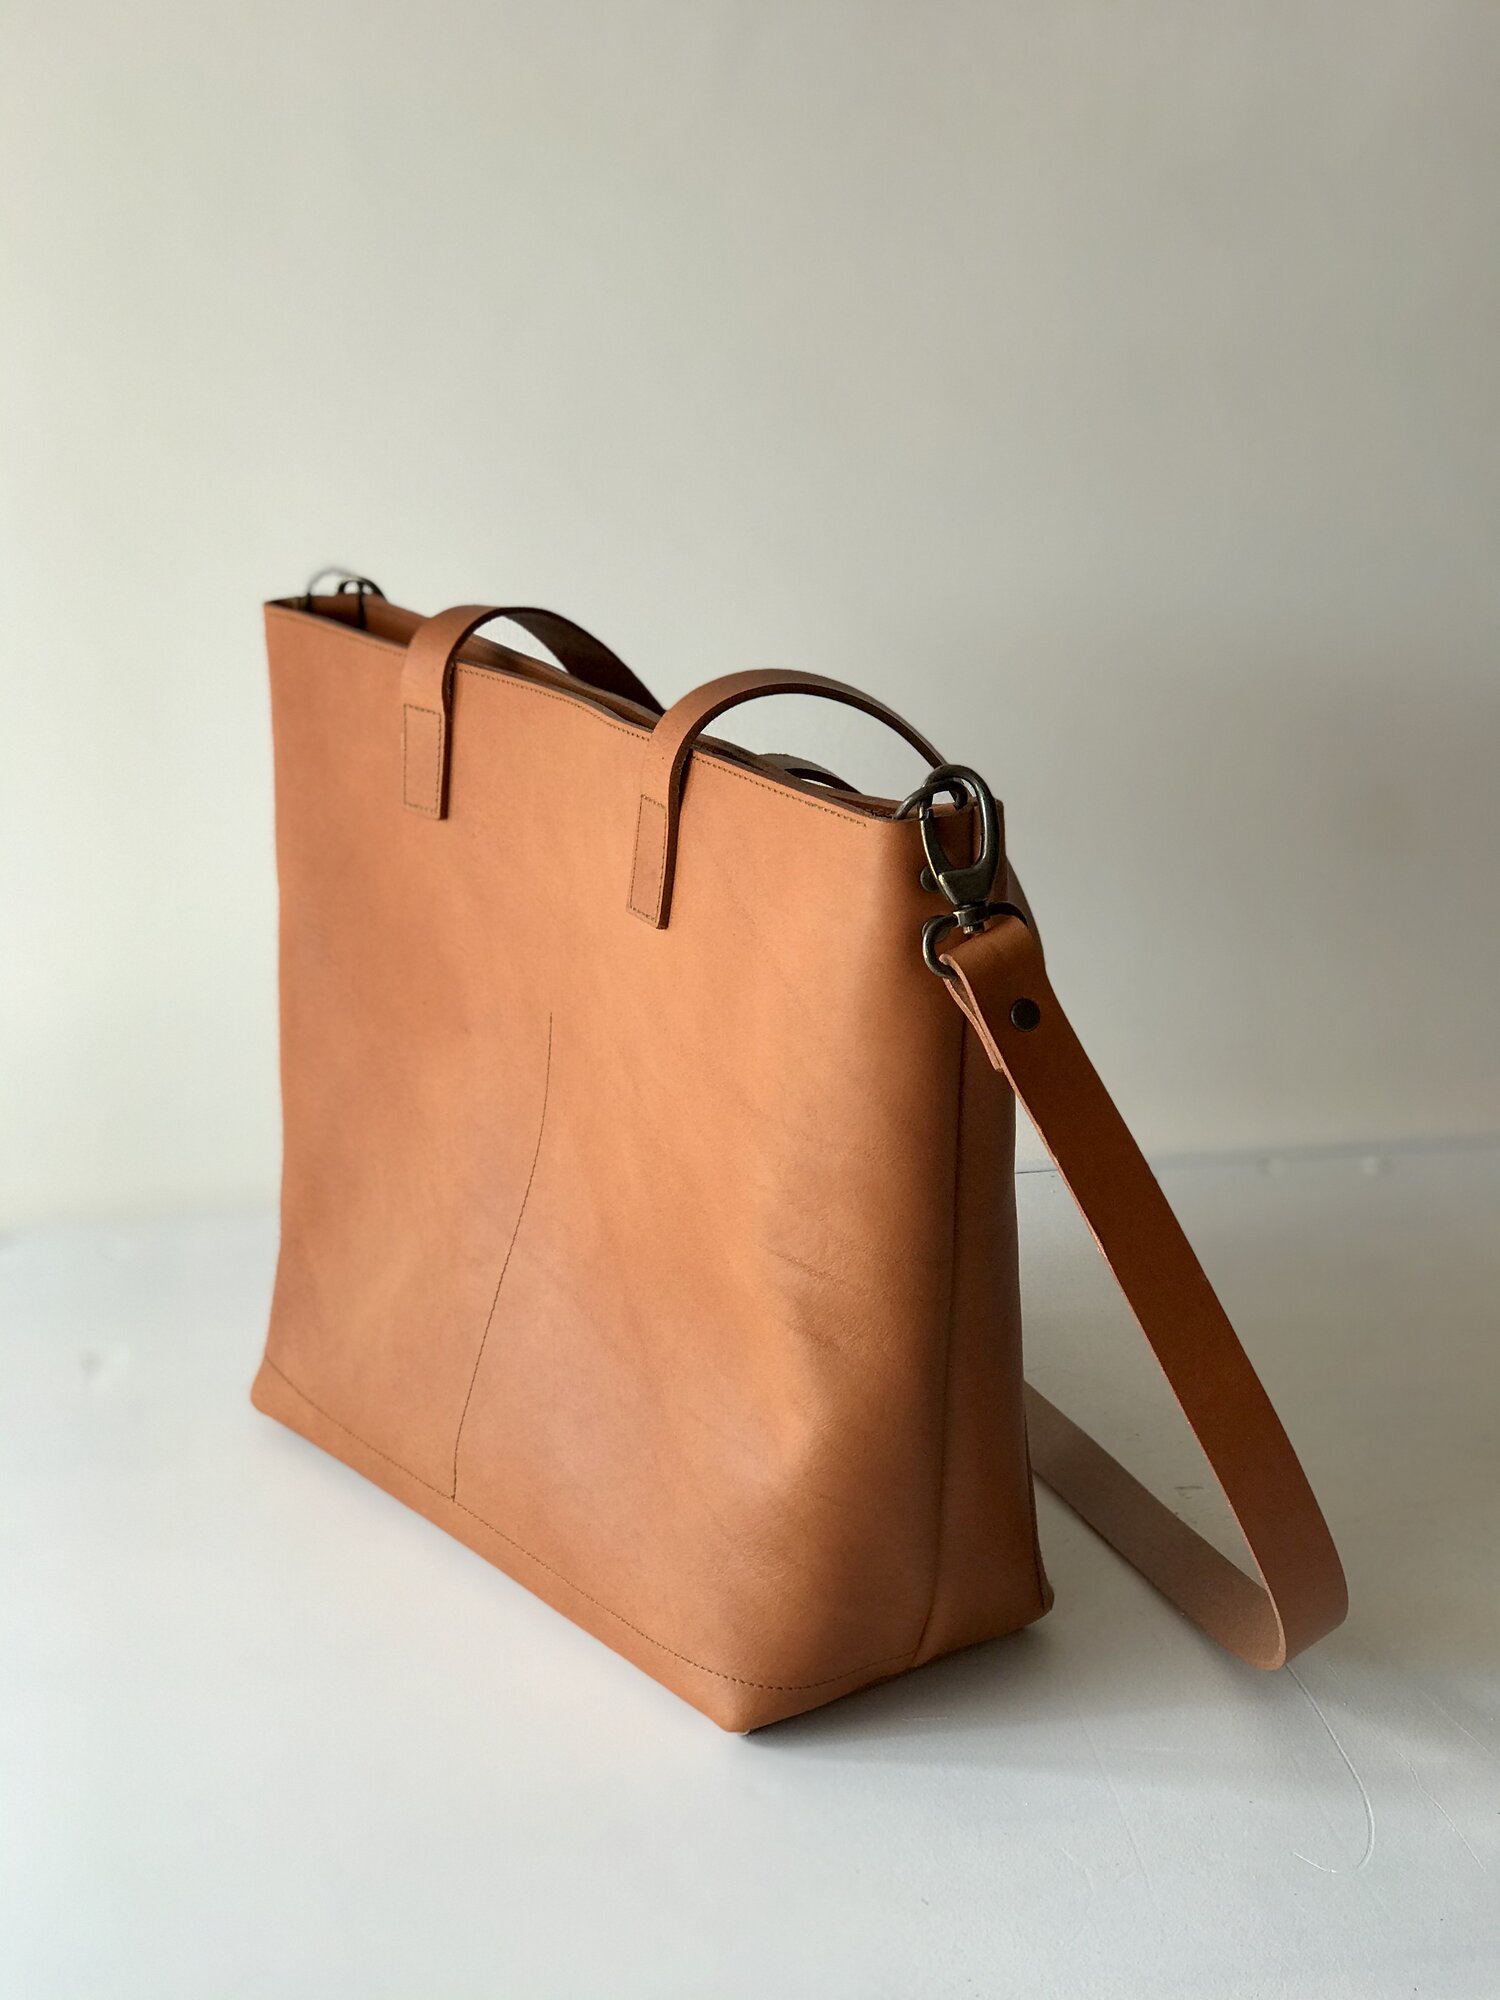 Cap Sa Sal bag. Camel leather tote bag with dark brown straps — Vermut  Atelier